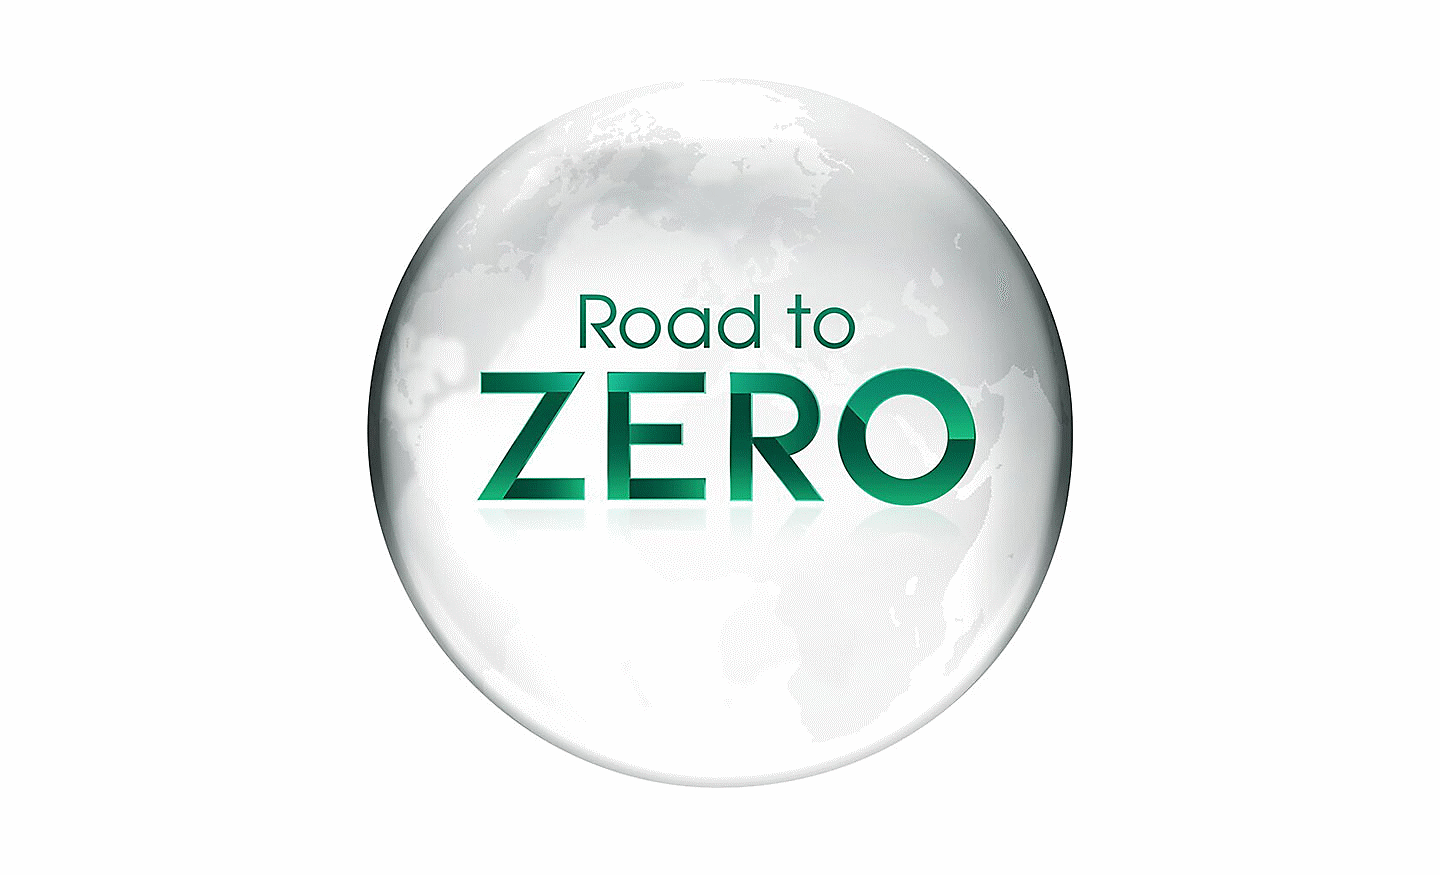 An image of the Road to Zero logo.